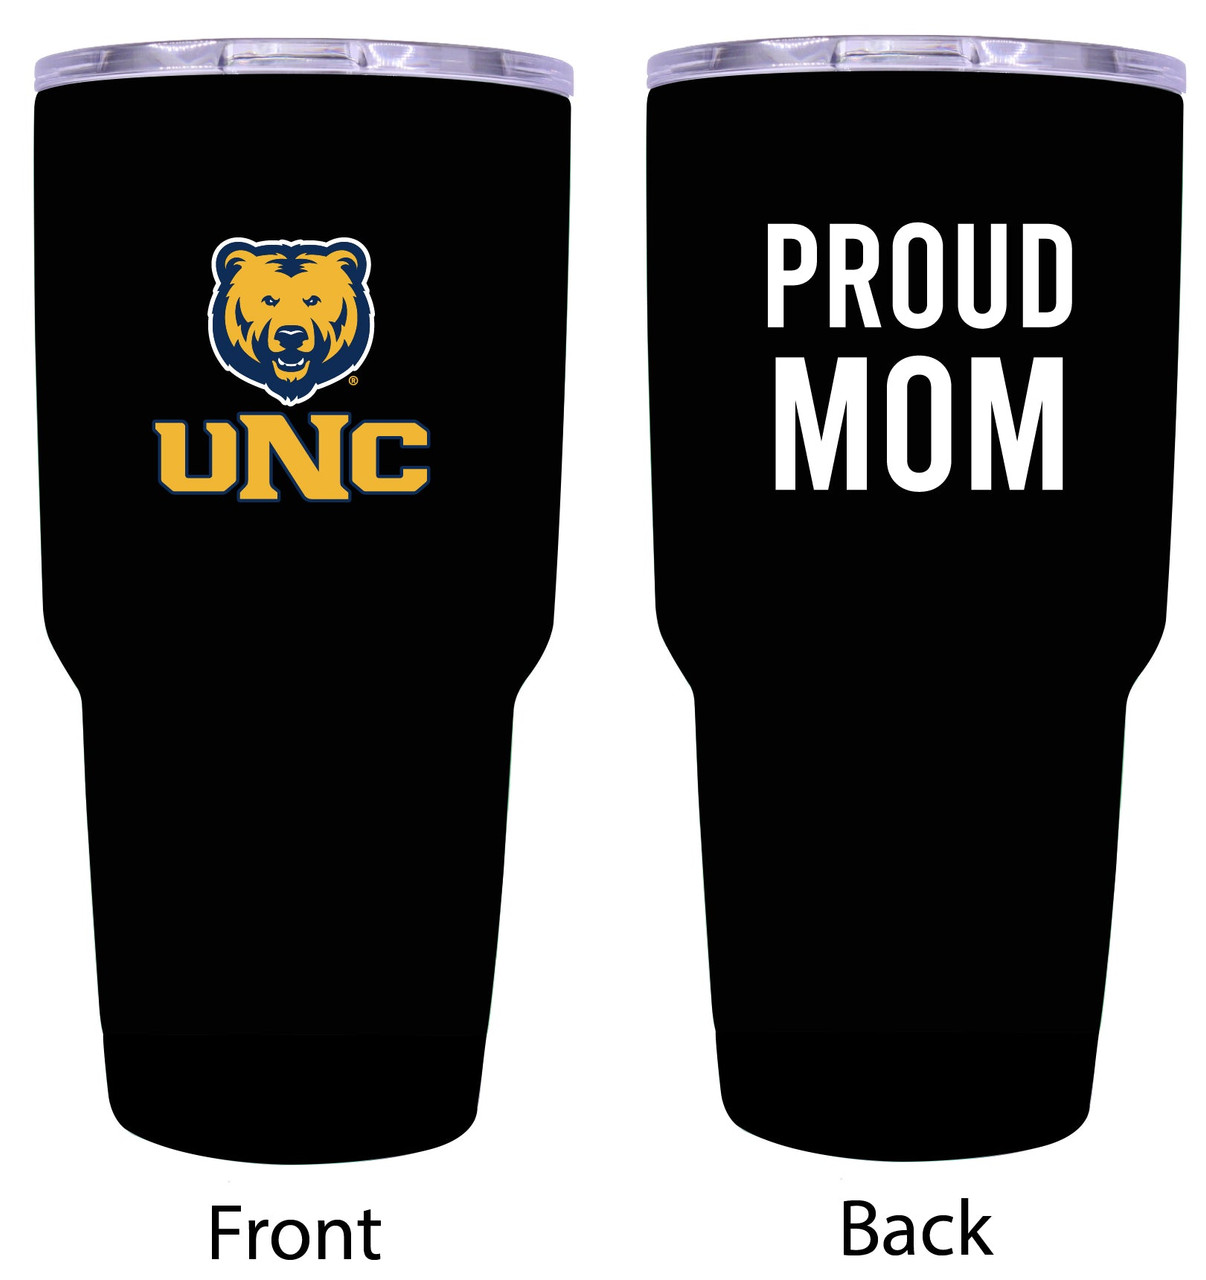 Northern Colorado Bears Proud Mom 24 oz Insulated Stainless Steel Tumblers Black.